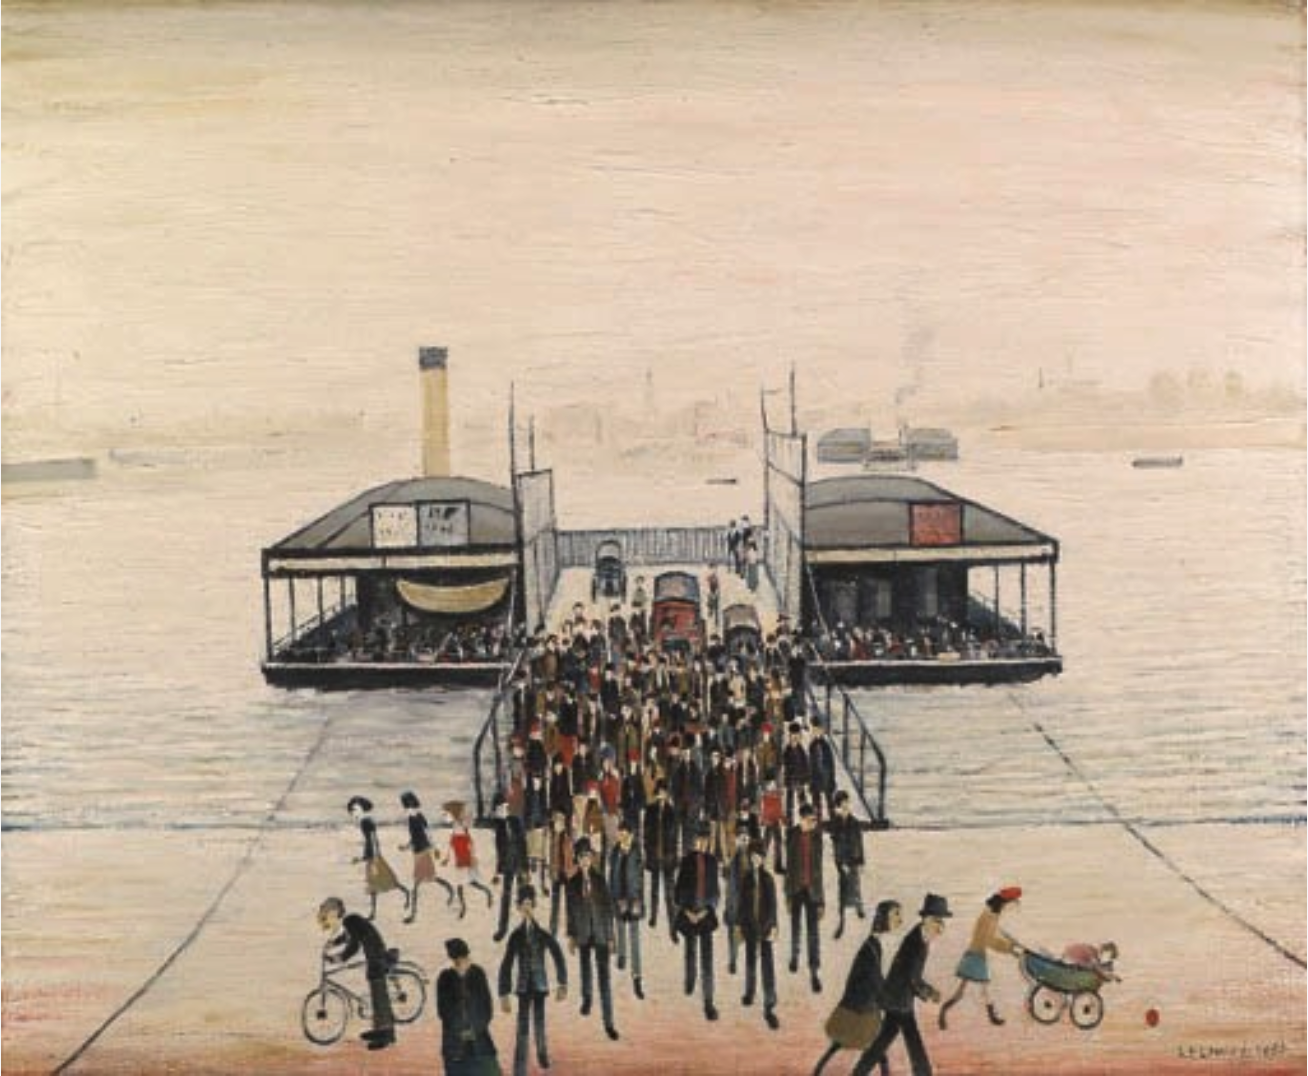 The Floating Bridge, Southampton (1956) by Laurence Stephen Lowry (1887 - 1976), English artist.